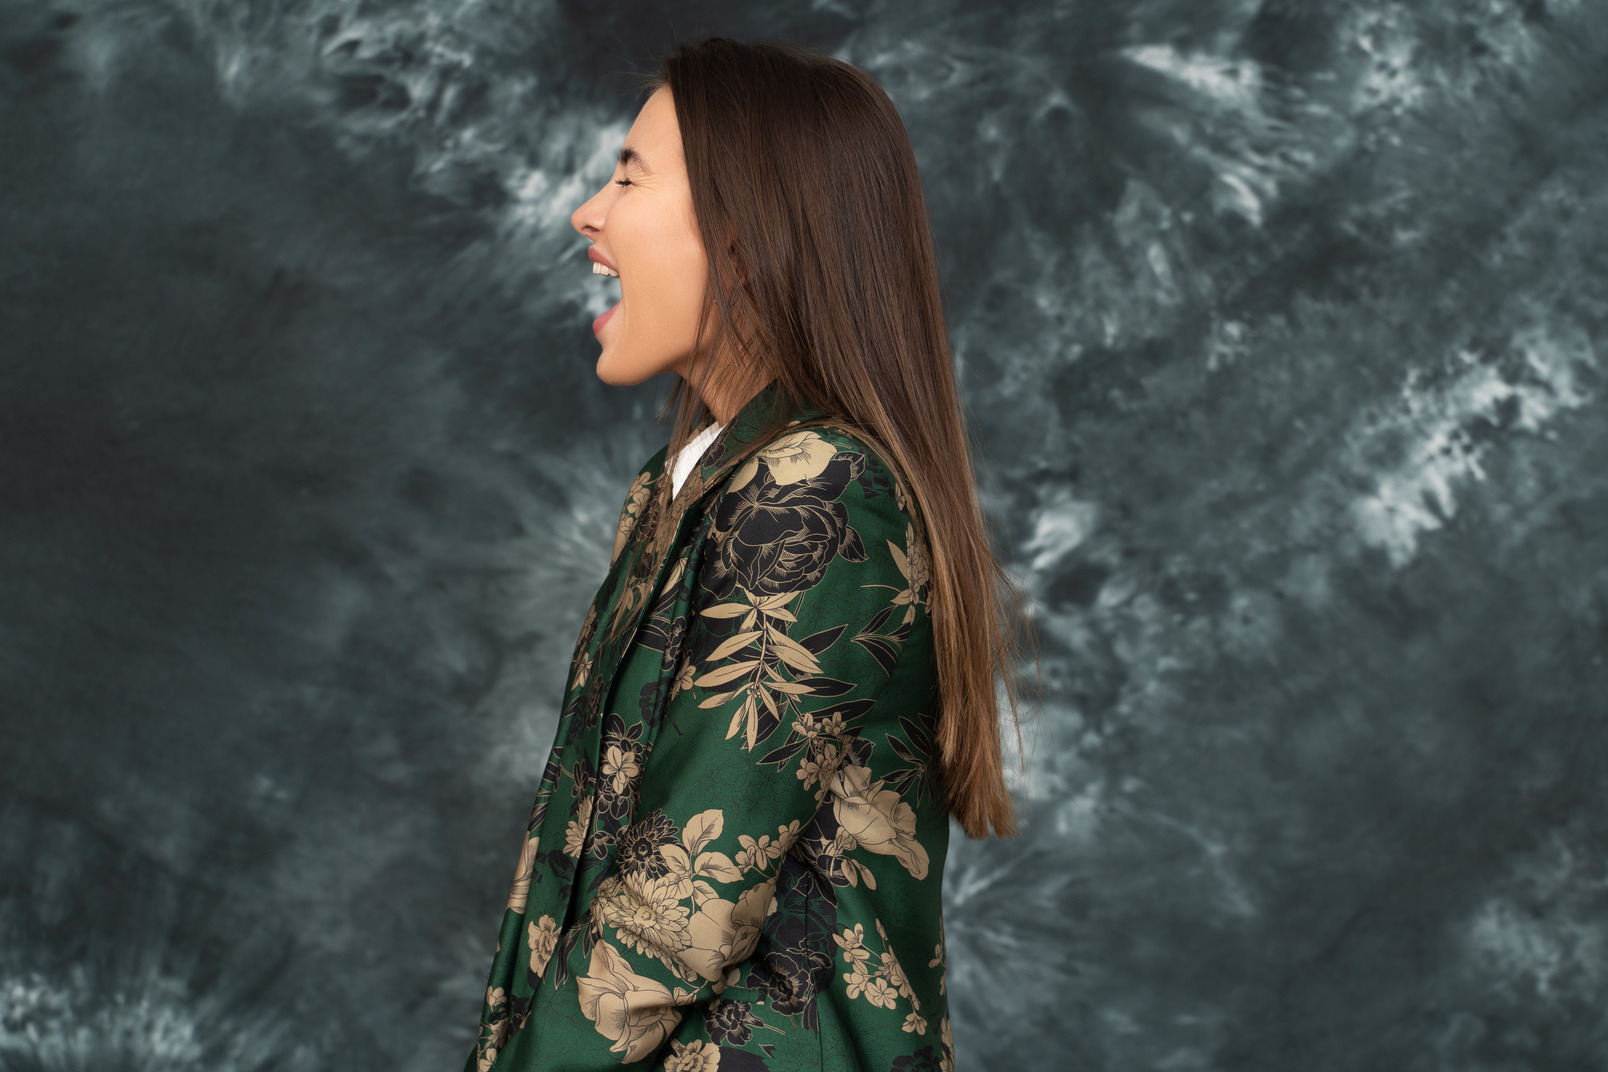 Portrait of screaming business woman in green japanese jacket